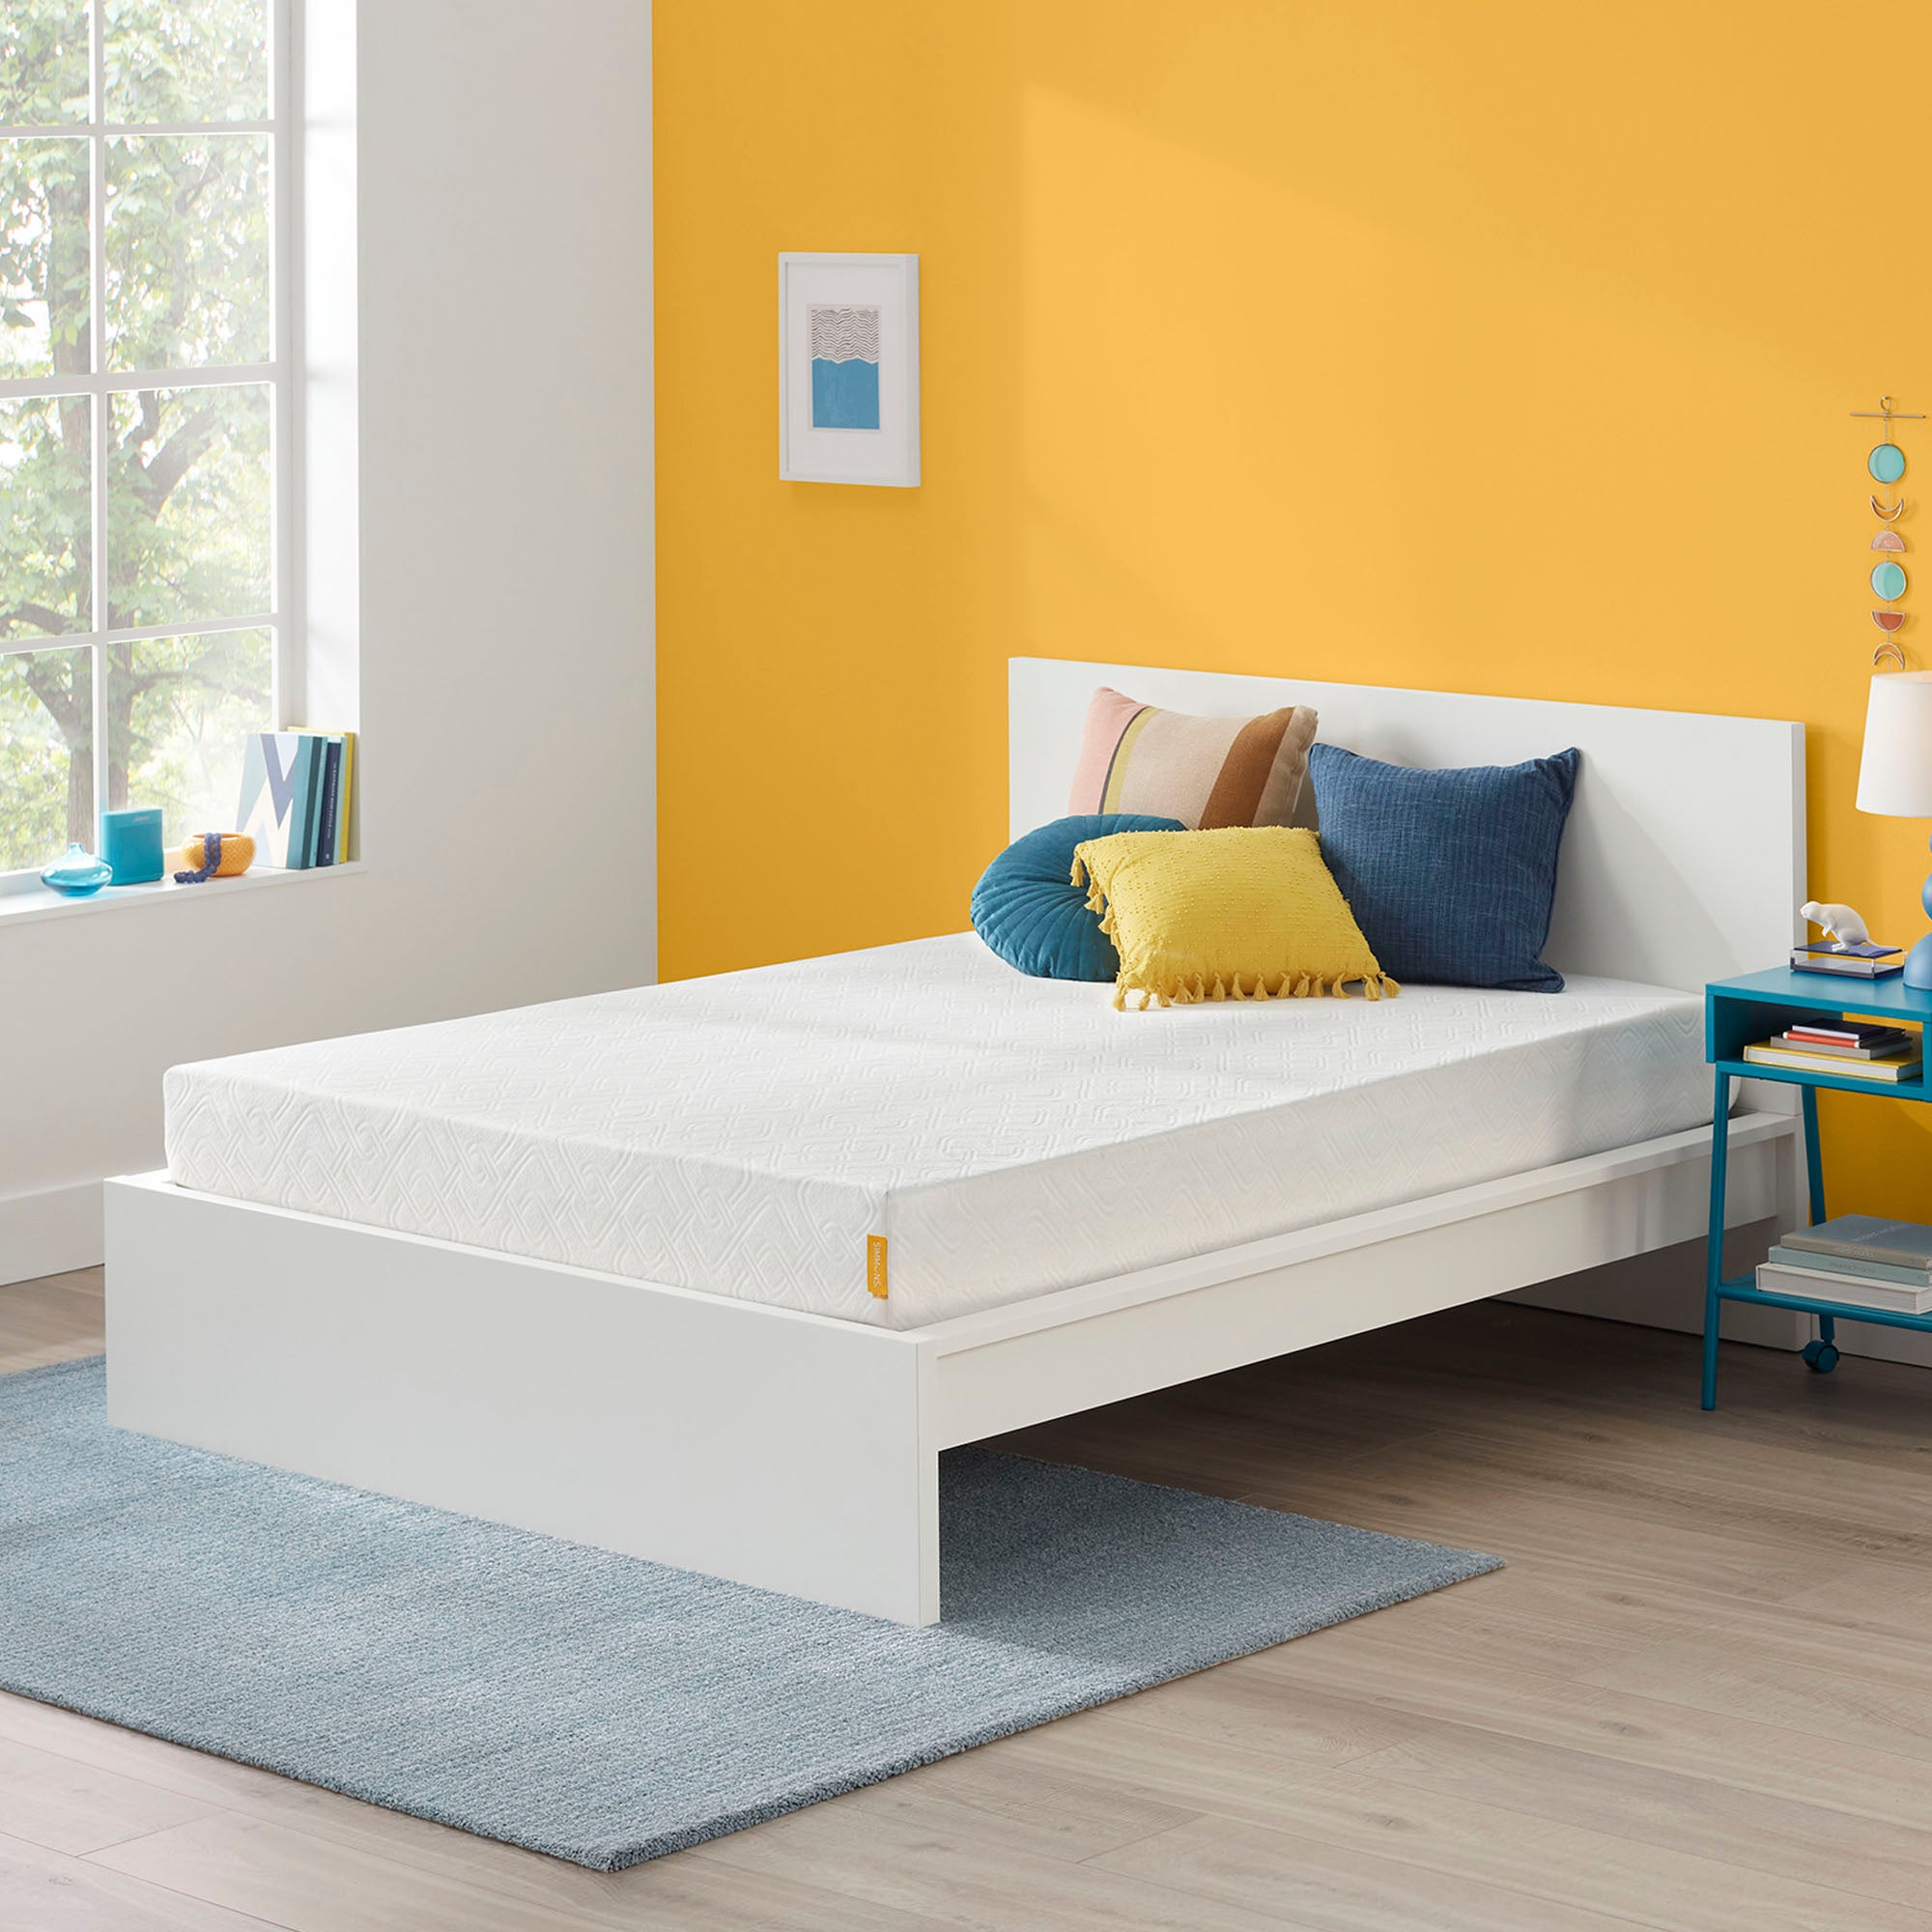 Firm Memory Foam Mattress in a room next to a nightstand